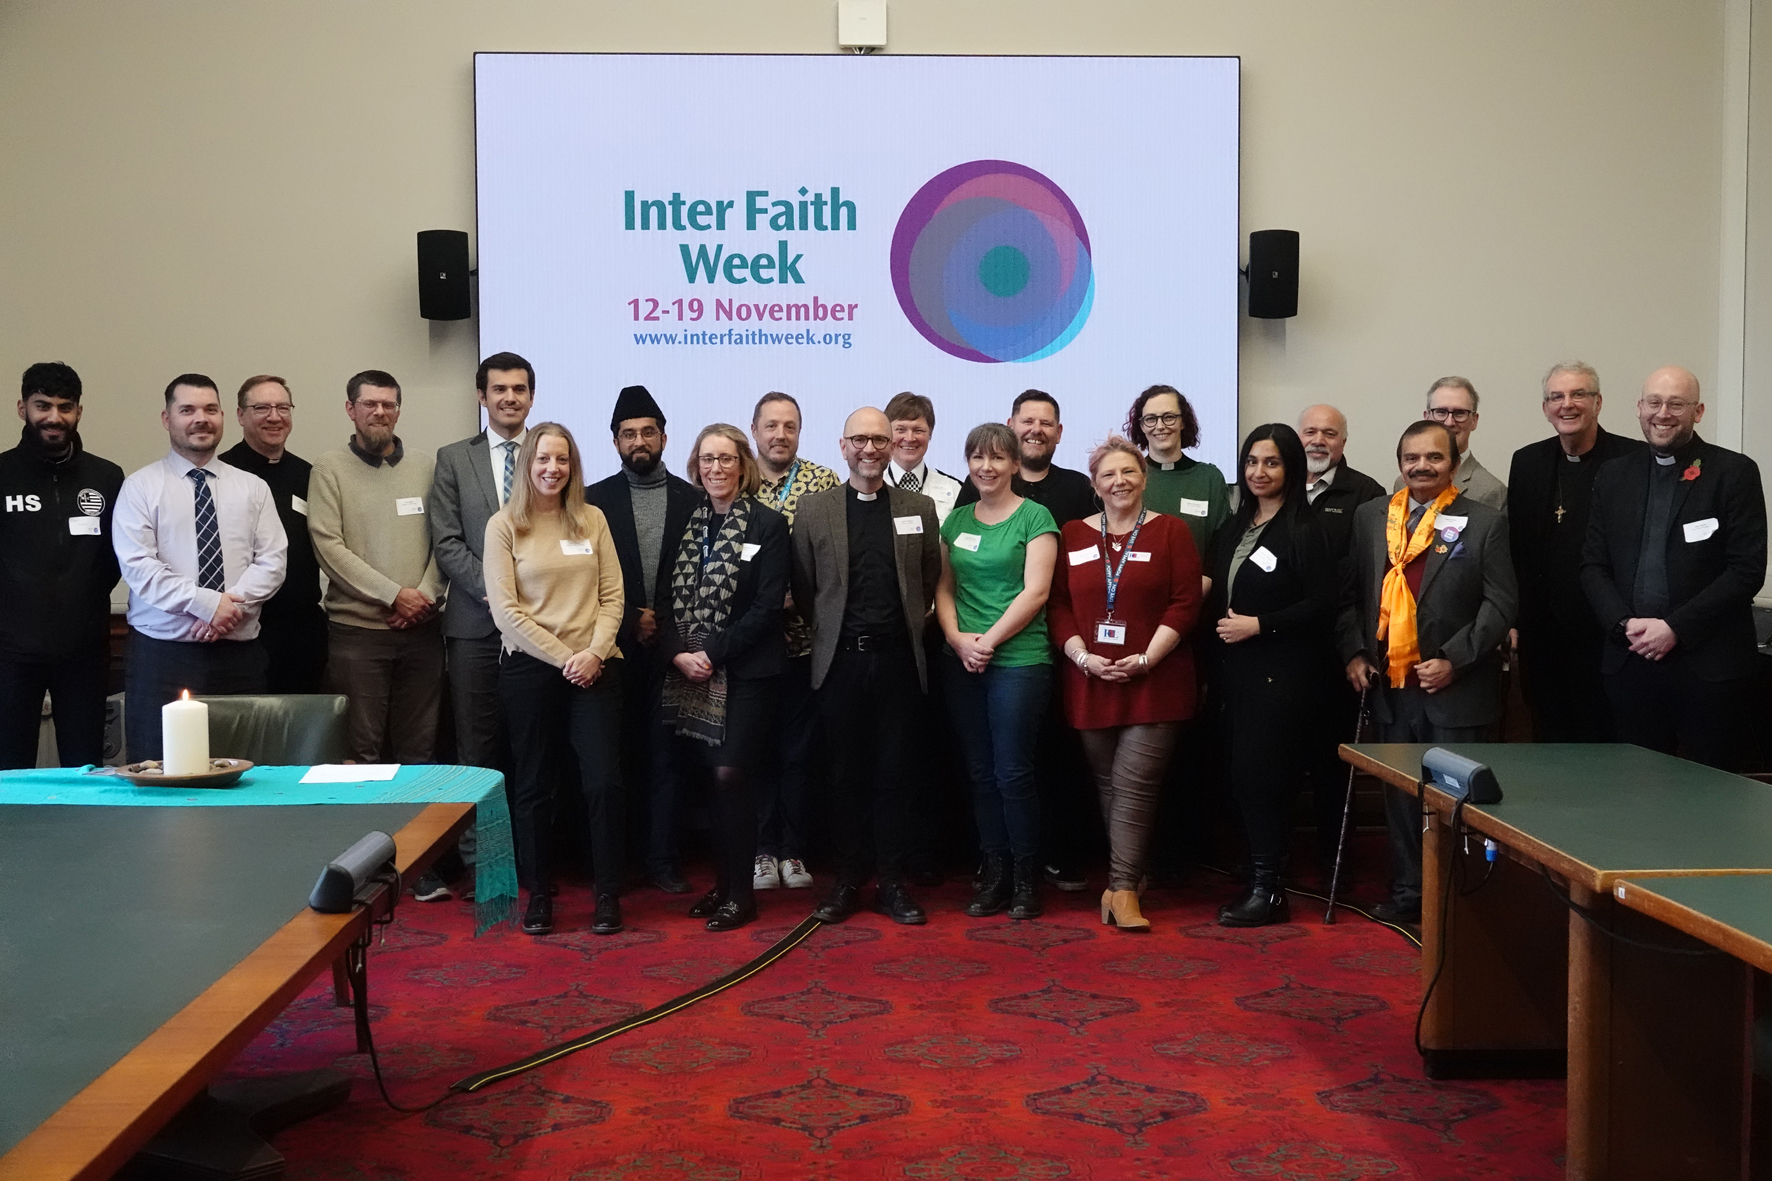 People gathered for the interfaith reception standing at the front of the room in front of an interfaith week sign